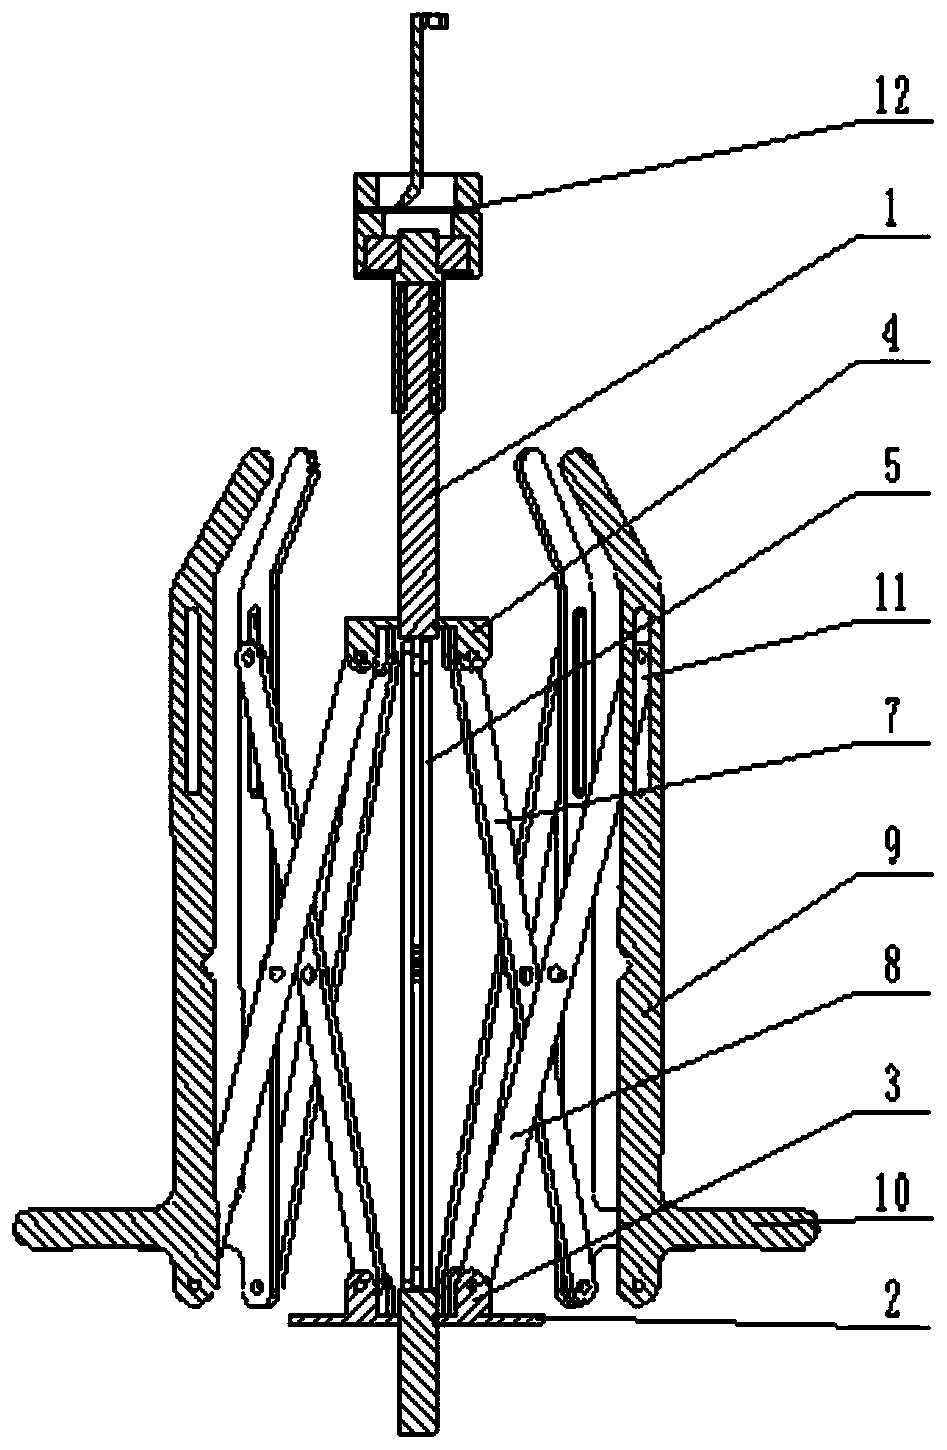 Yarn supporting device for skein rewinding and elastic yarn thermal shrinkage or expansion processing and yarn dyeing method based on yarn supporting device